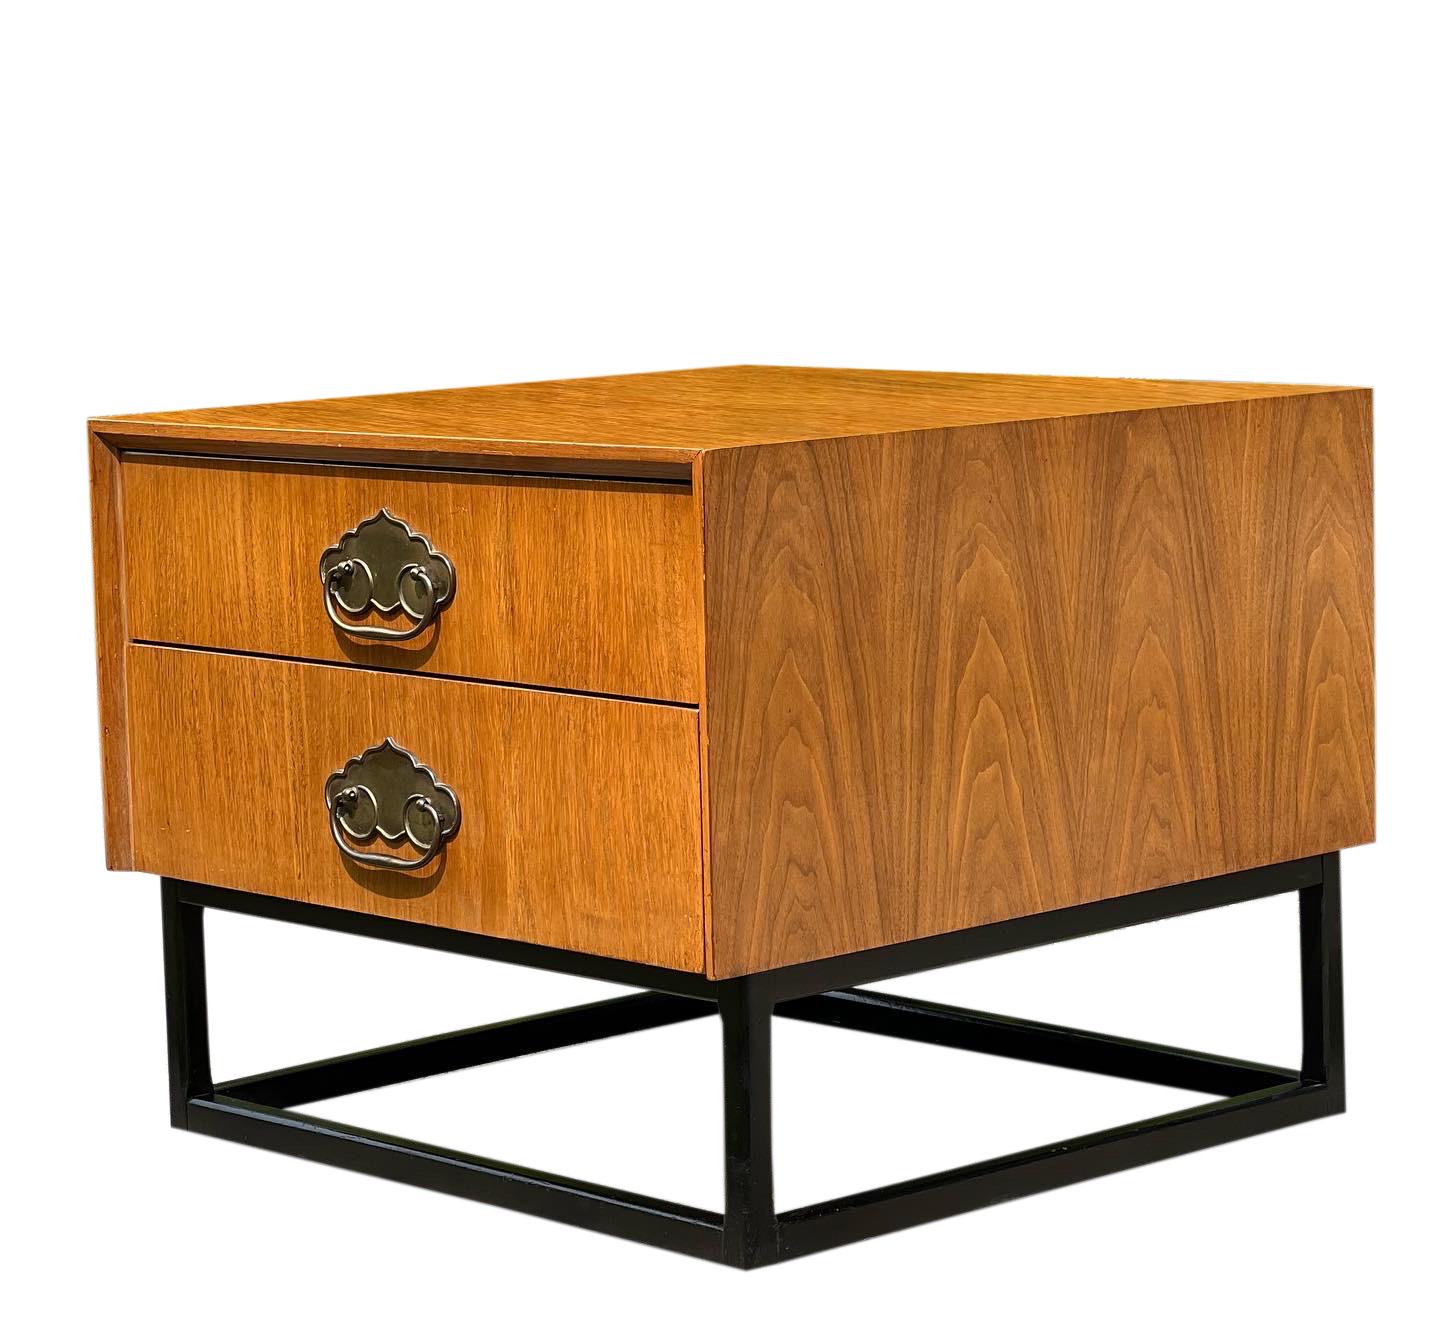 Fabulous vintage Asian inspired square walnut side table or nightstand by American of Martinsville.

This handsome table features a modern, clean silhouette with a lacquered, ebonized open frame wood base and offers two large dovetail drawers with